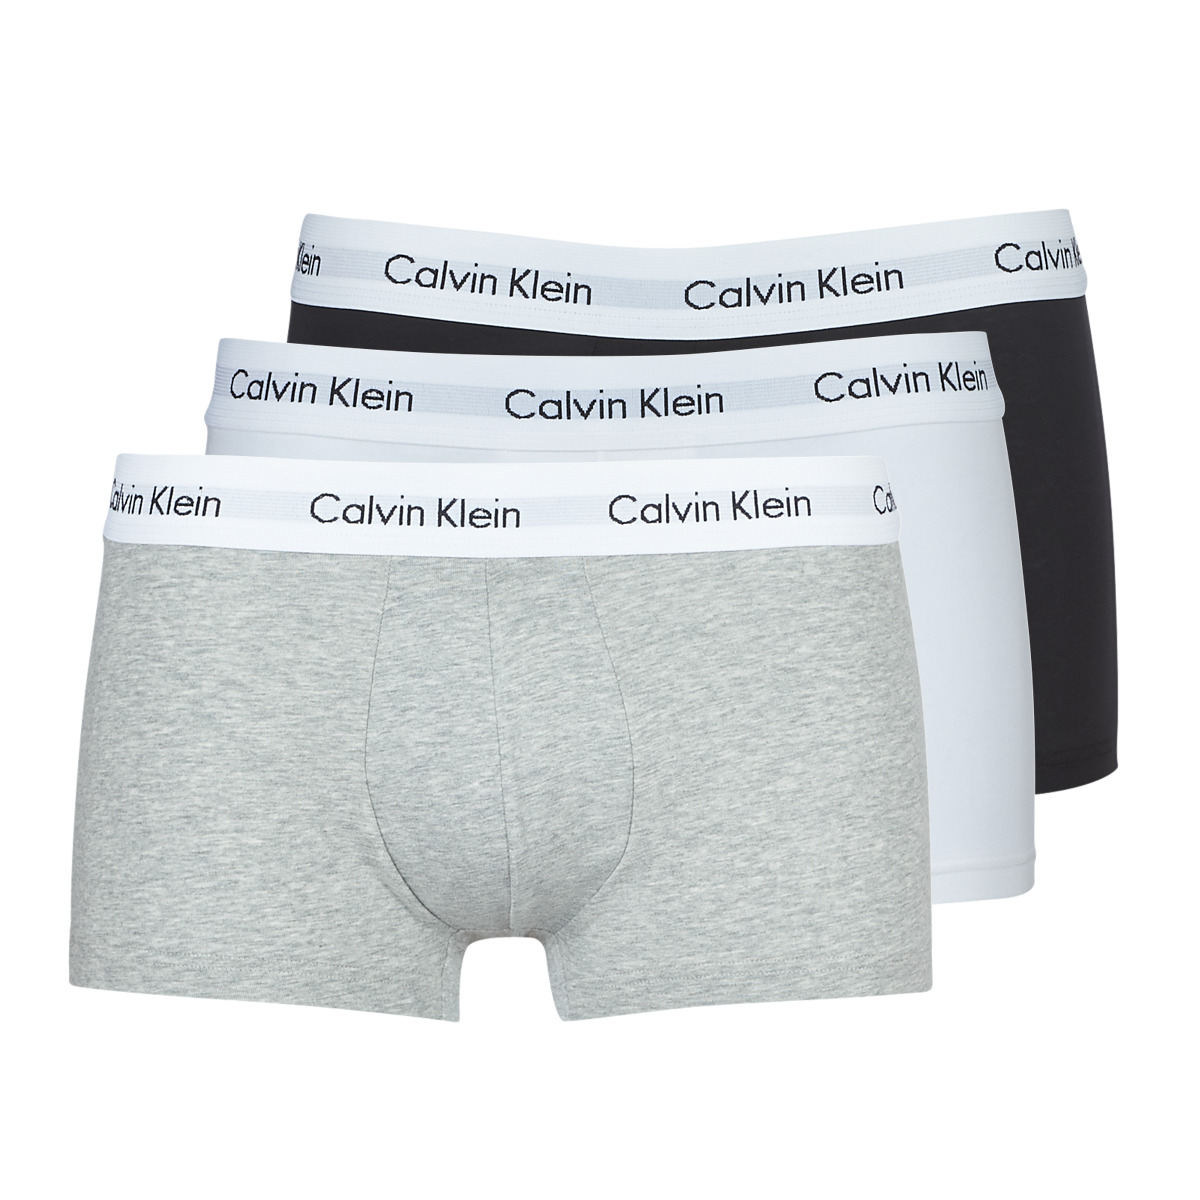 curly Police station thrill Calvin Klein Jeans COTTON STRECH LOW RISE TRUNK X 3 Black / White / Grey /  Mottled - Fast delivery | Spartoo Europe ! - Underwear Boxer shorts Men  47,00 €